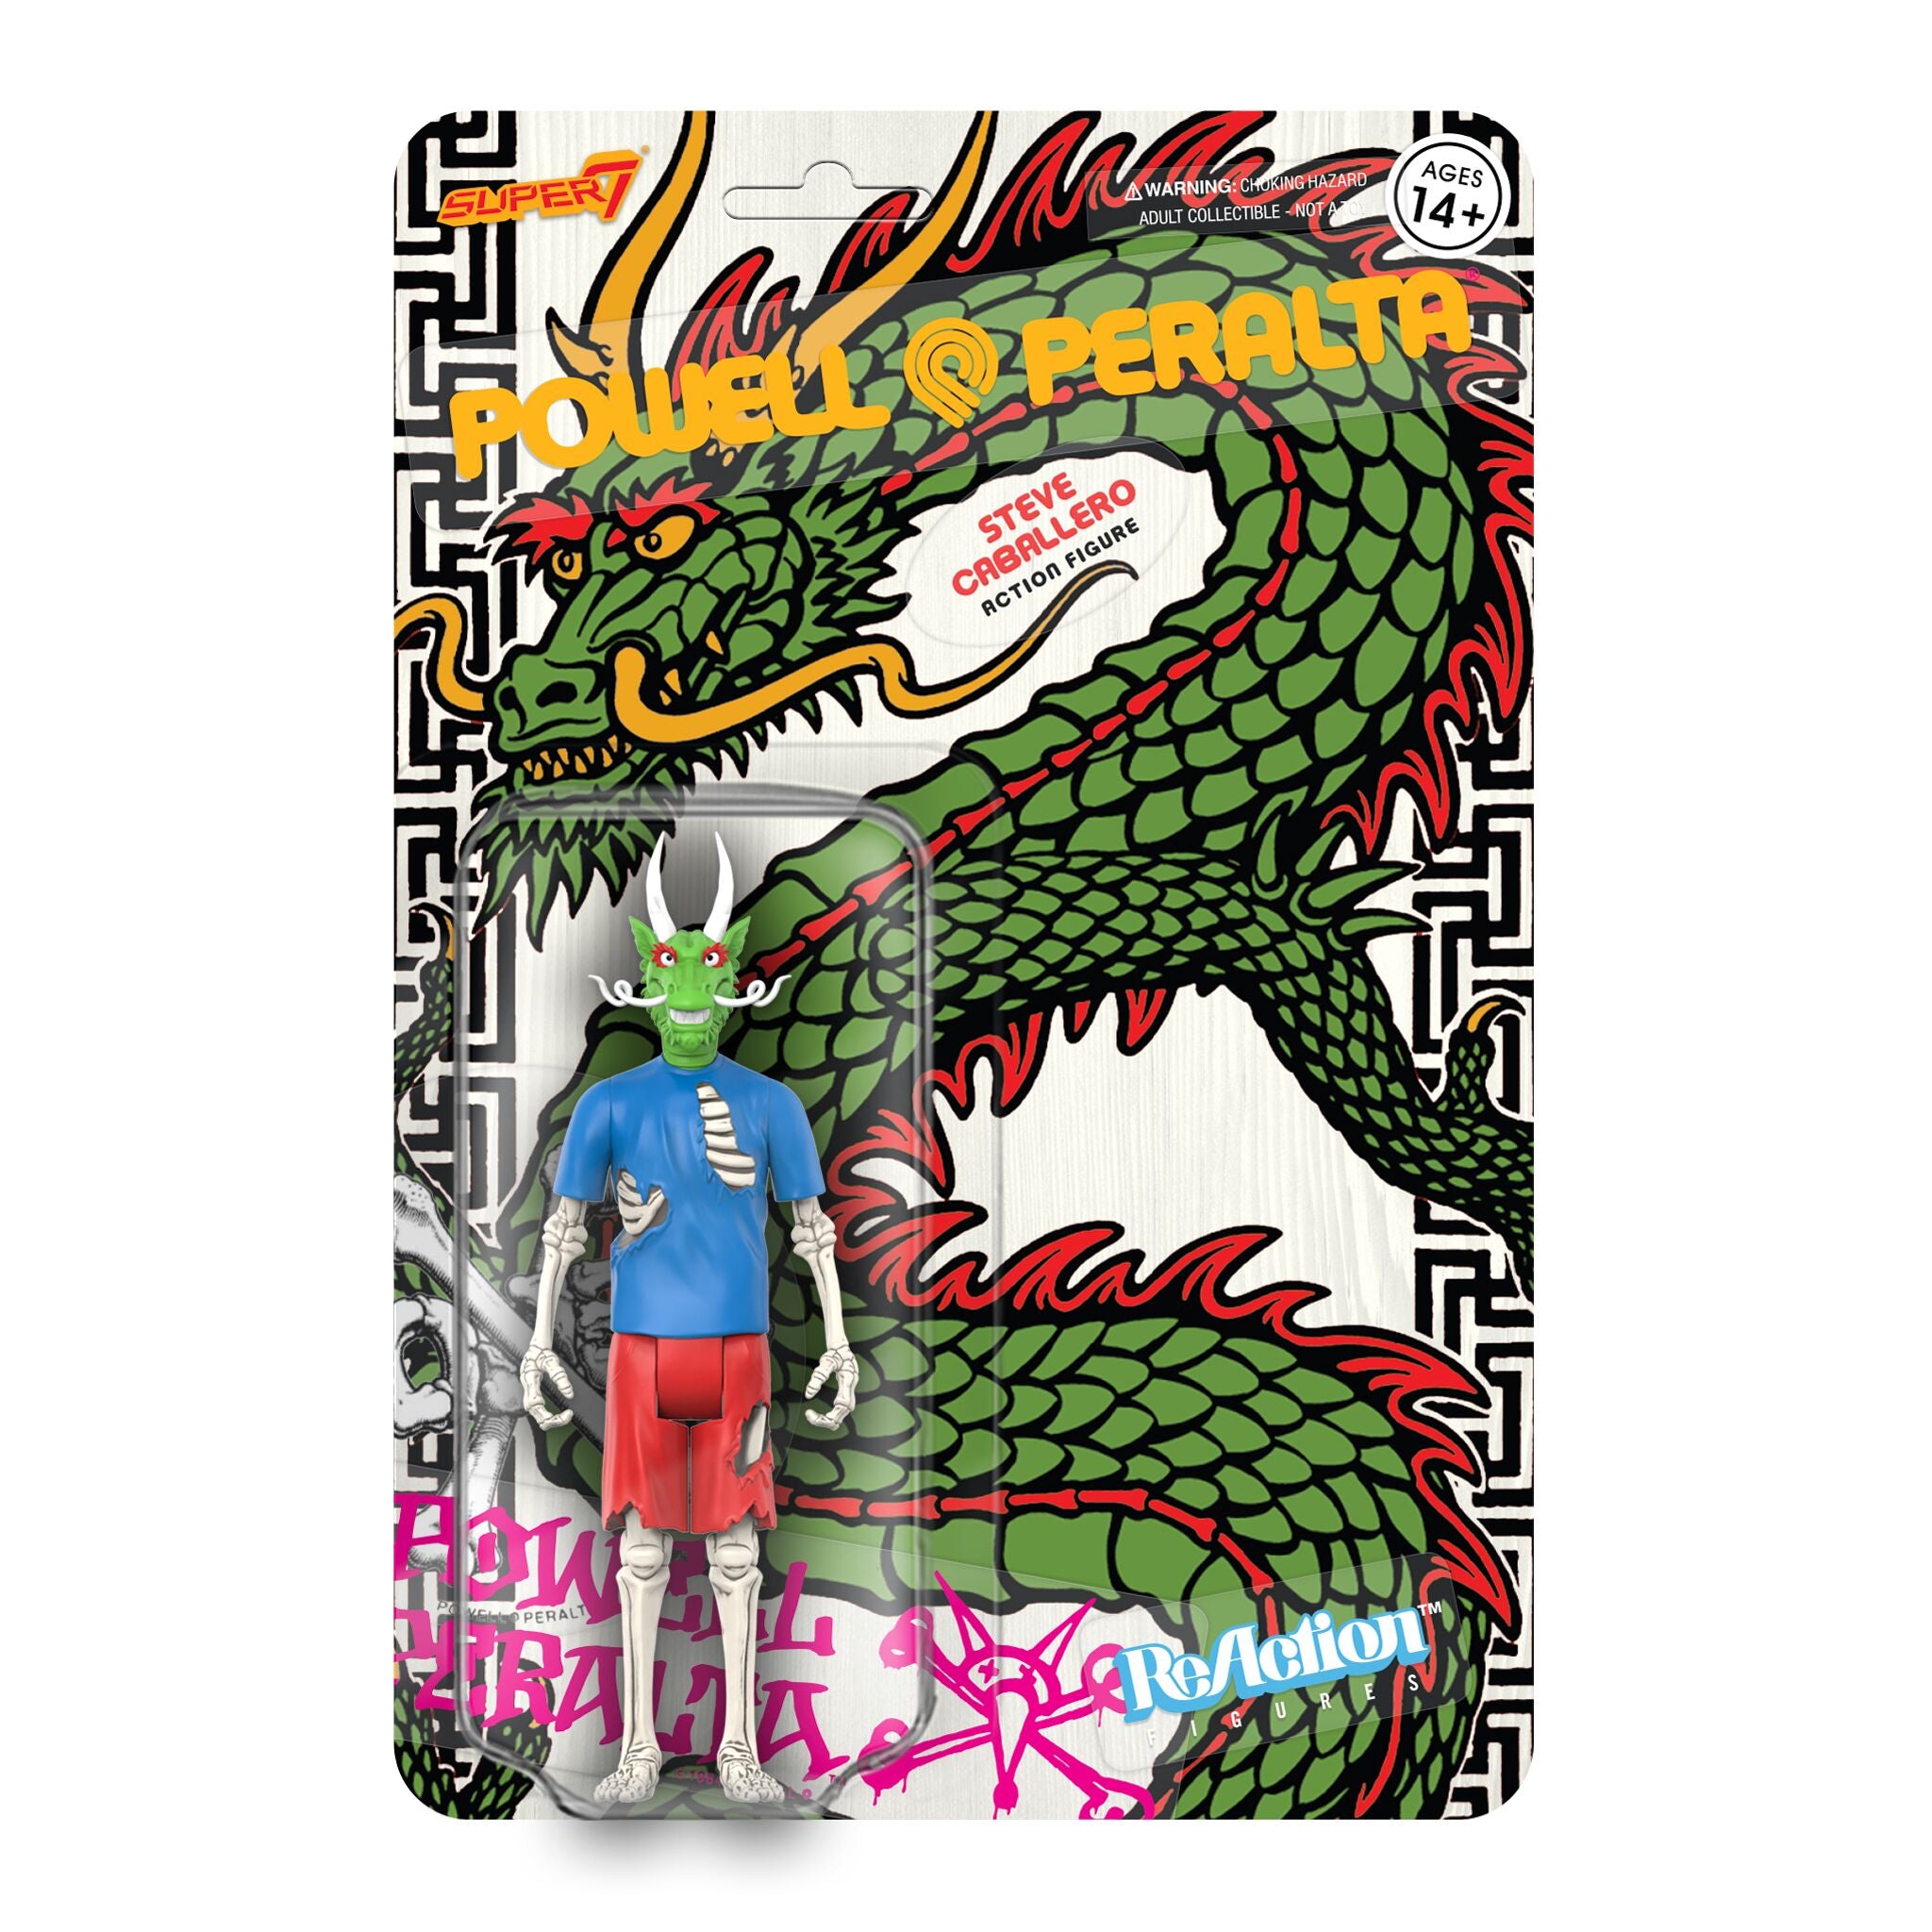 Powell-Peralta ReAction Figure Wave 3 - Steve Caballero (Chinese Dragon)